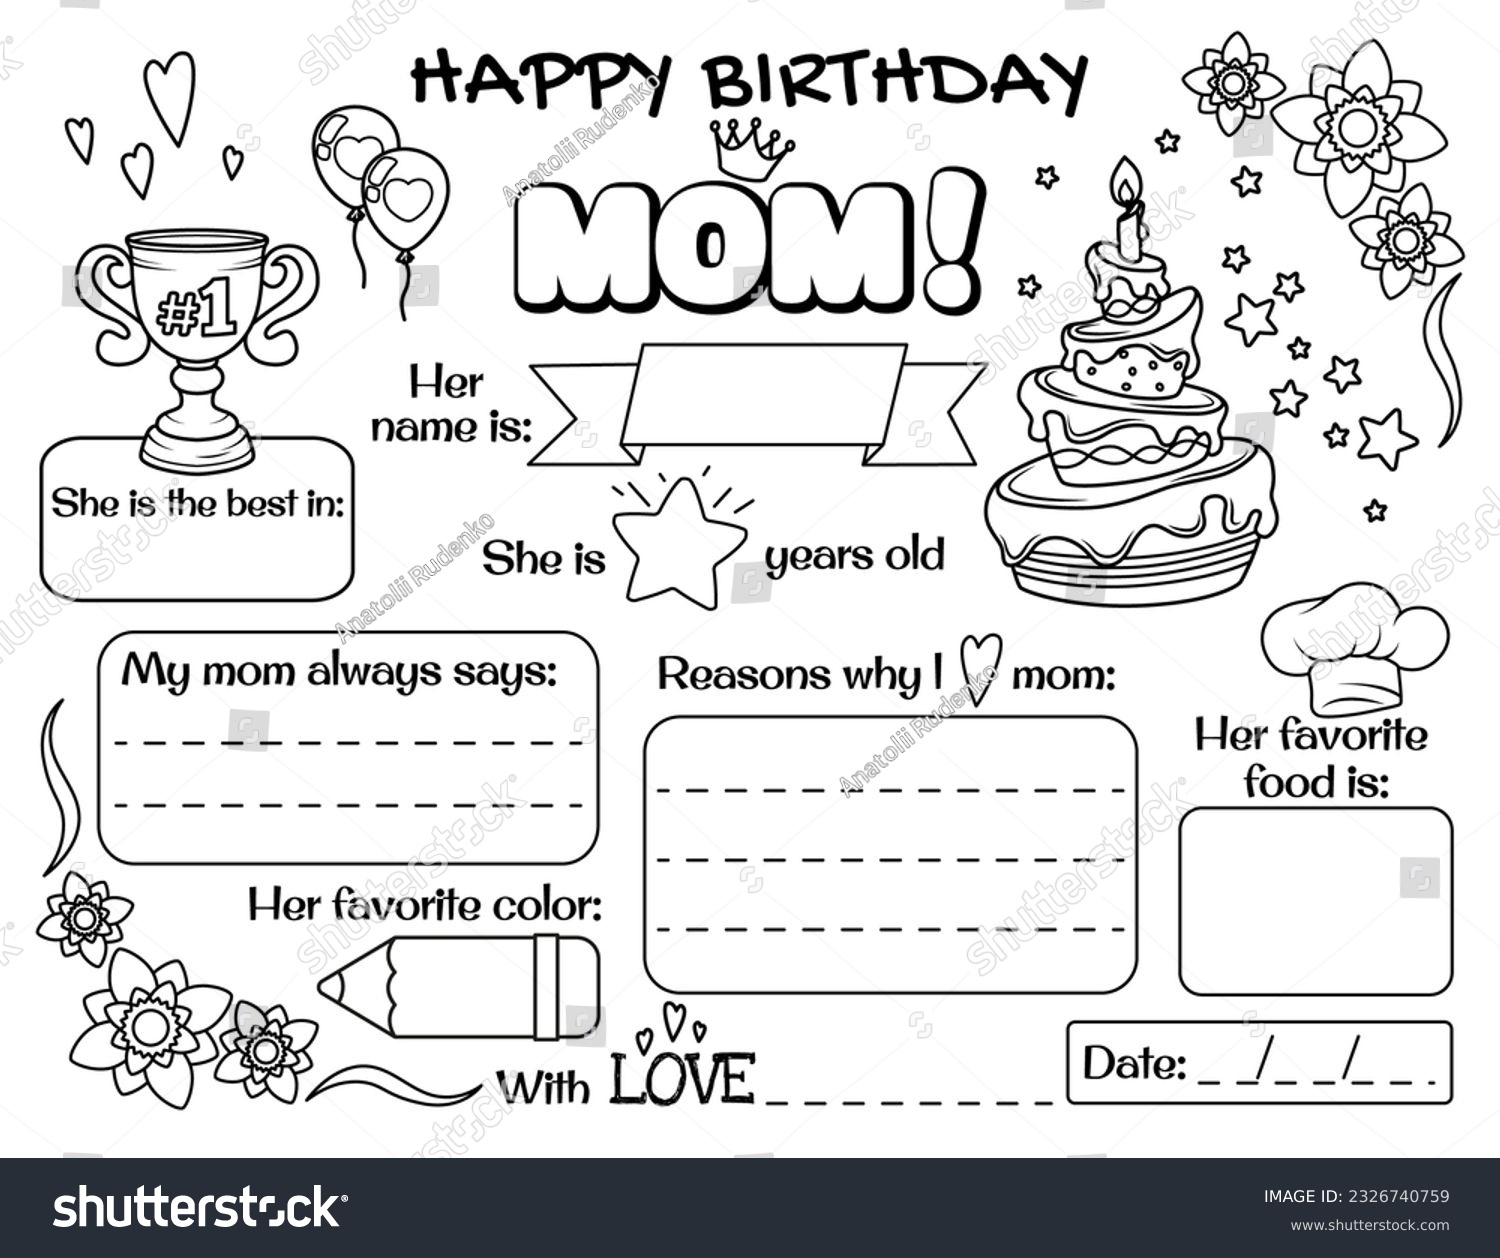 49 Printable Coloring Birthday Cards Mom Images Stock Photos 3D Objects Vectors Shutterstock